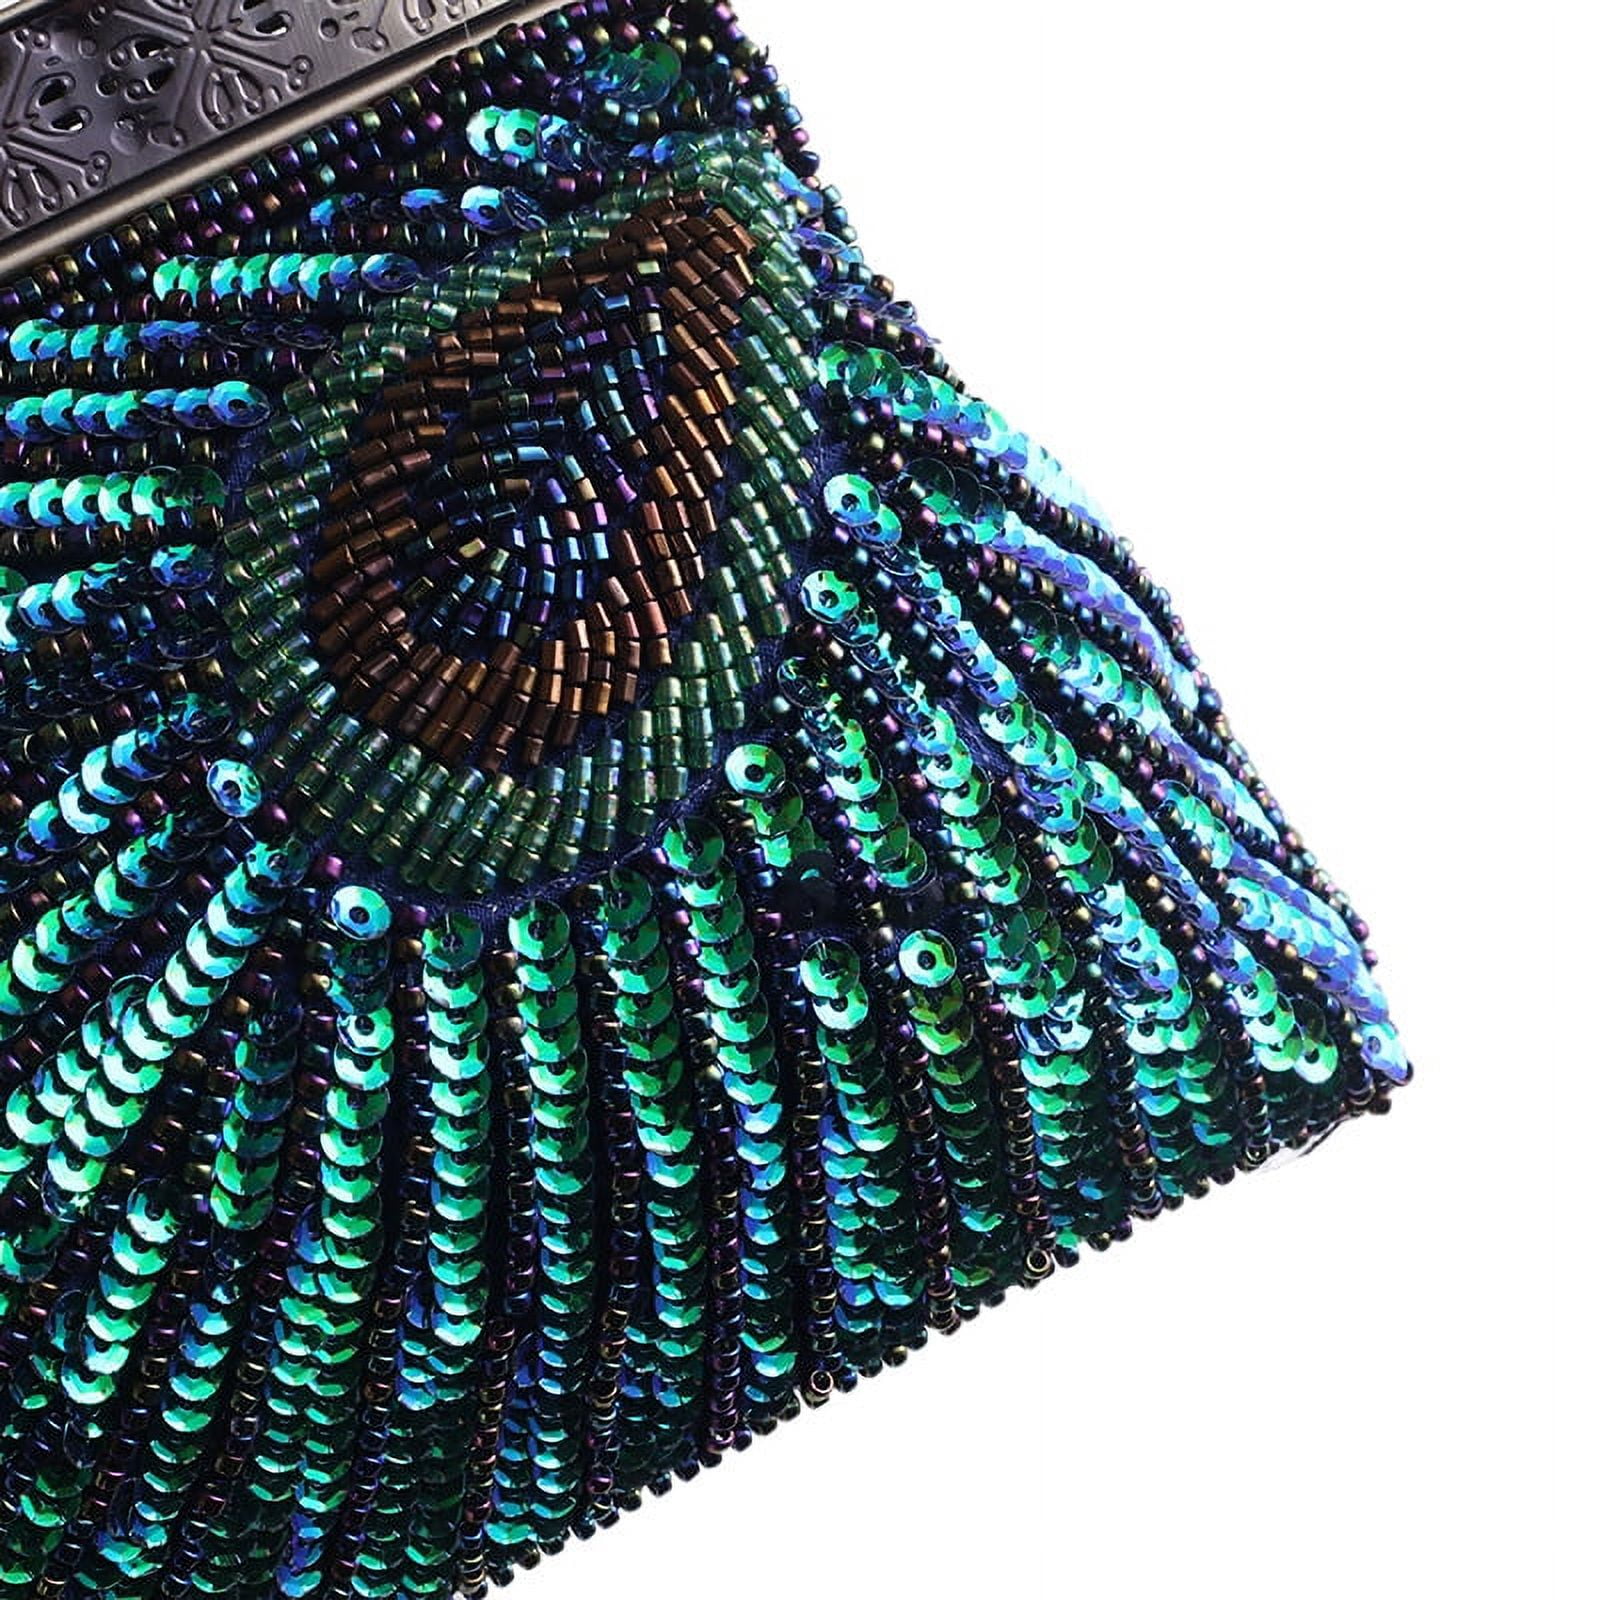 Gelory Peacock Clutch Bags For Women, Vintage Sequin Handbag Gifts Catching Purse Ladies Bags Jade Crystal Evening Bag